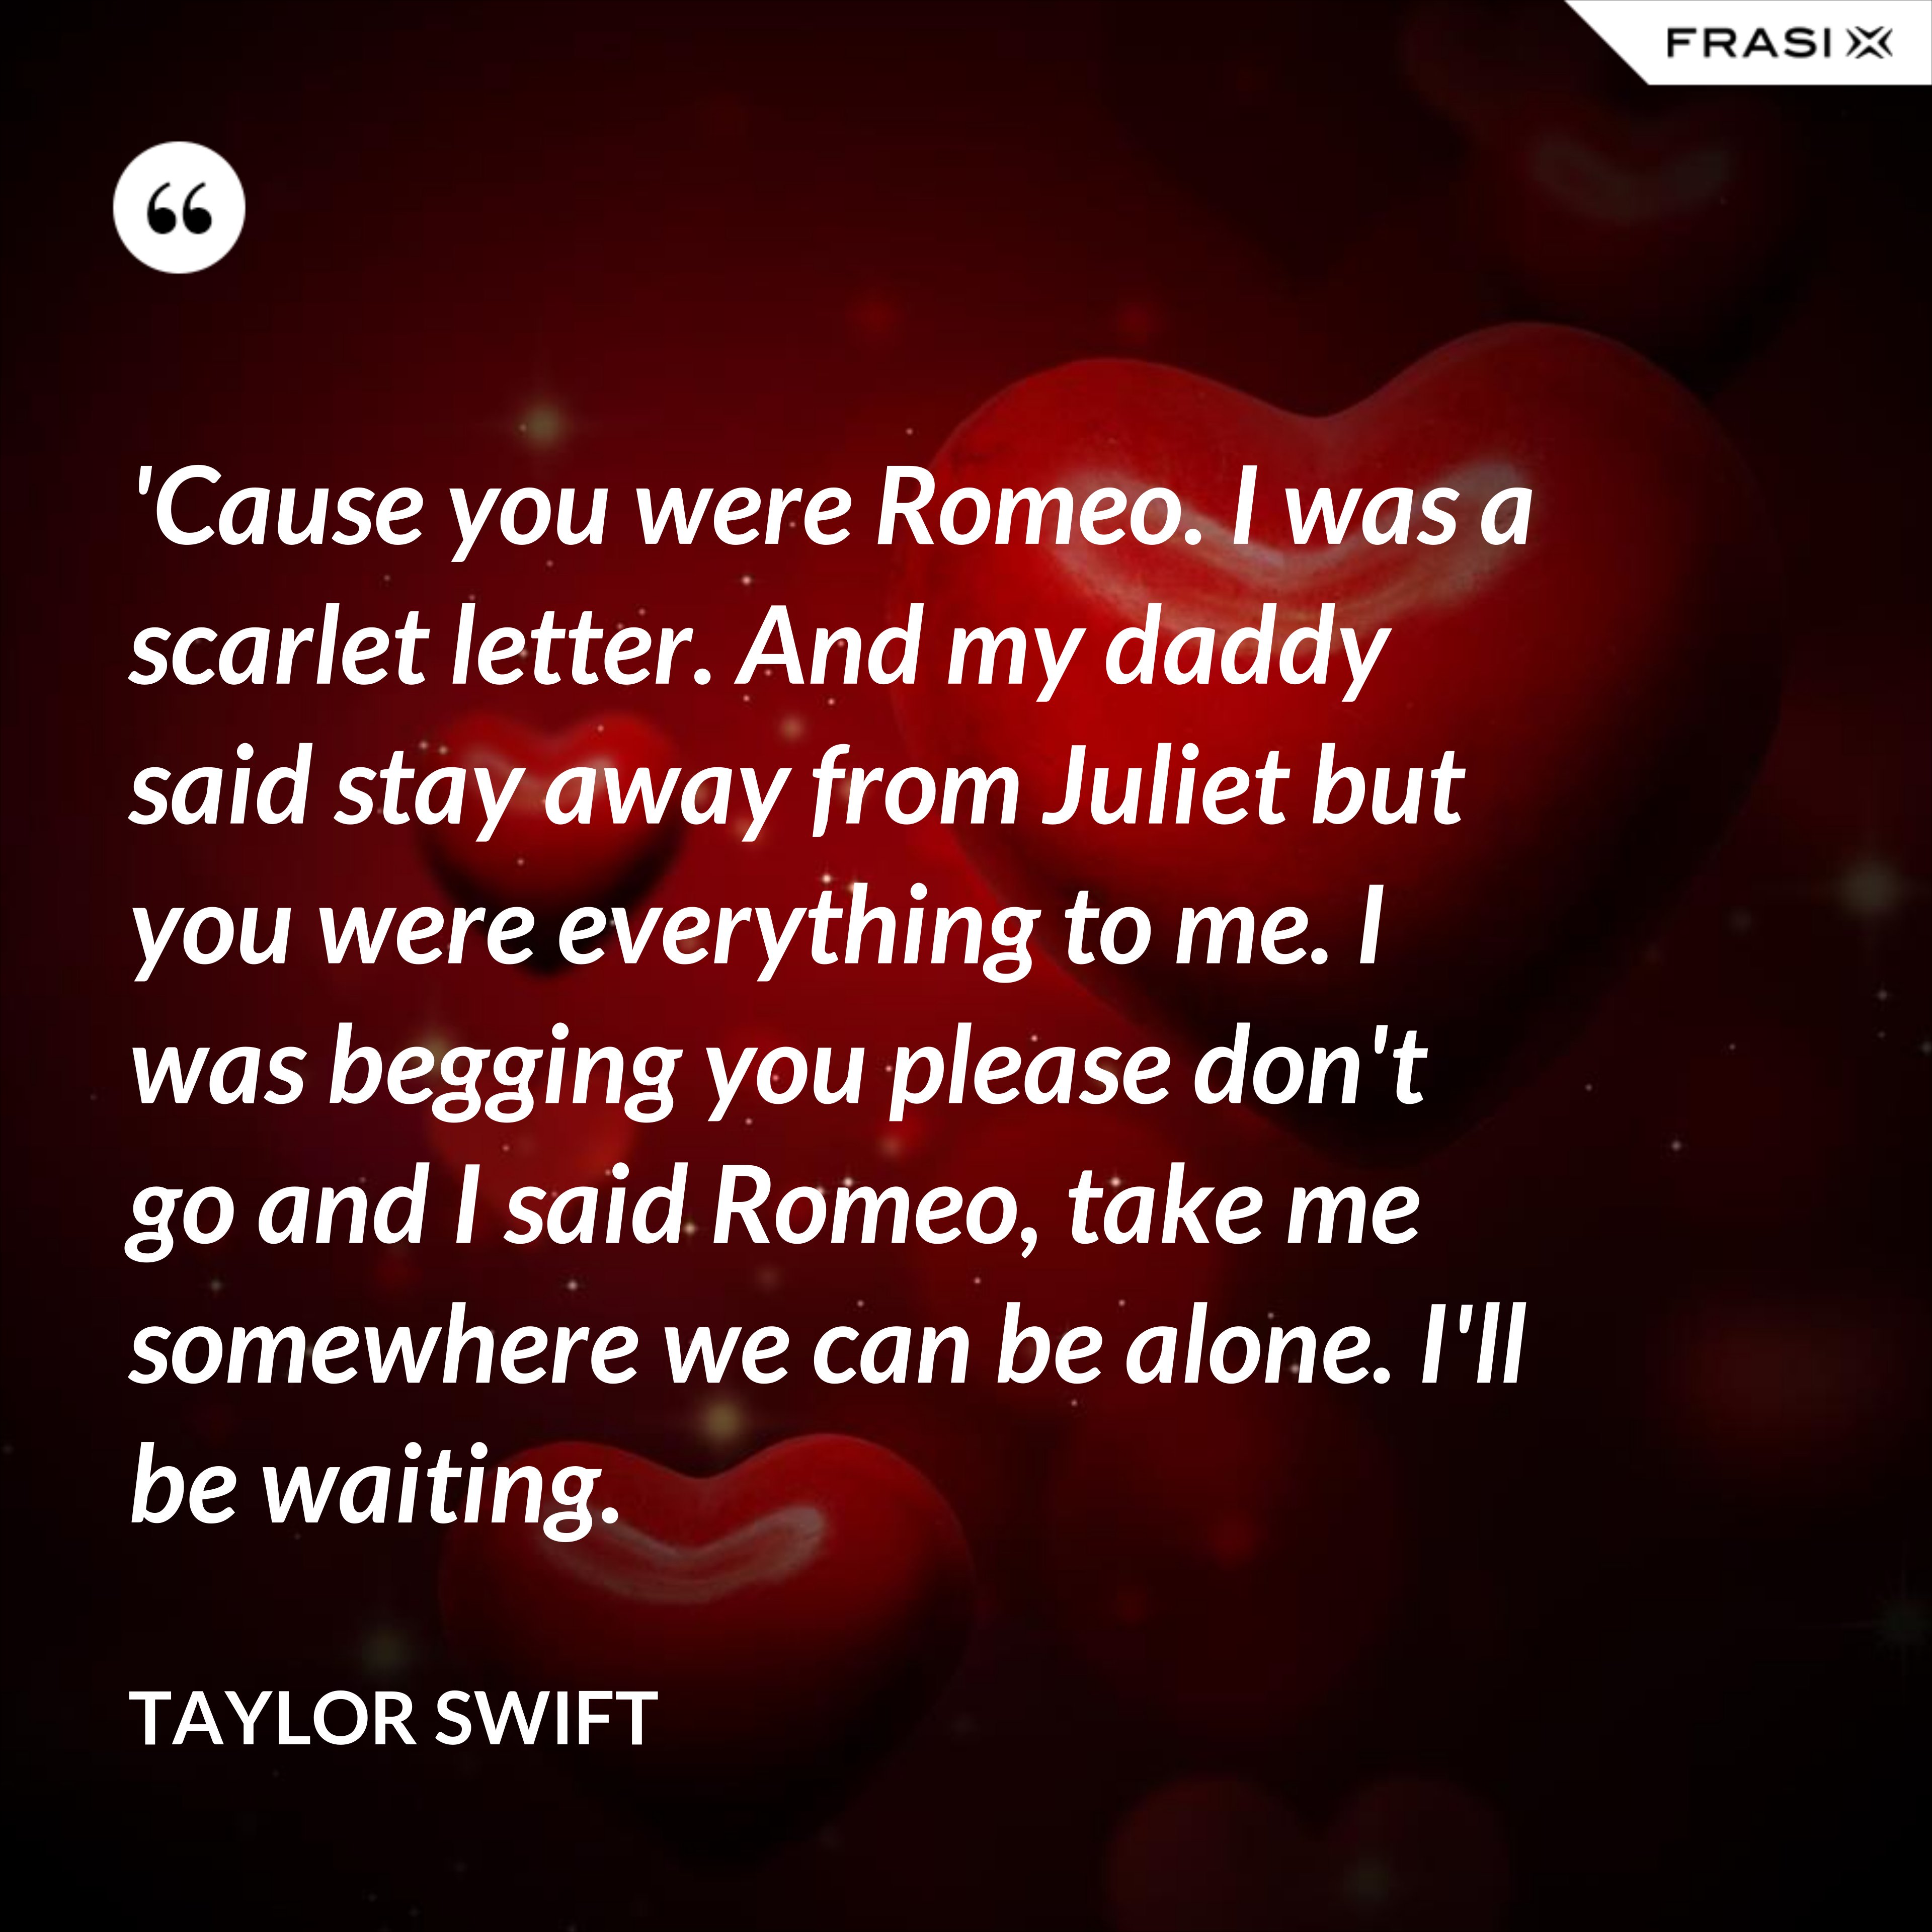 'Cause you were Romeo. I was a scarlet letter. And my daddy said stay away from Juliet but you were everything to me. I was begging you please don't go and I said Romeo, take me somewhere we can be alone. I'll be waiting. - Taylor Swift